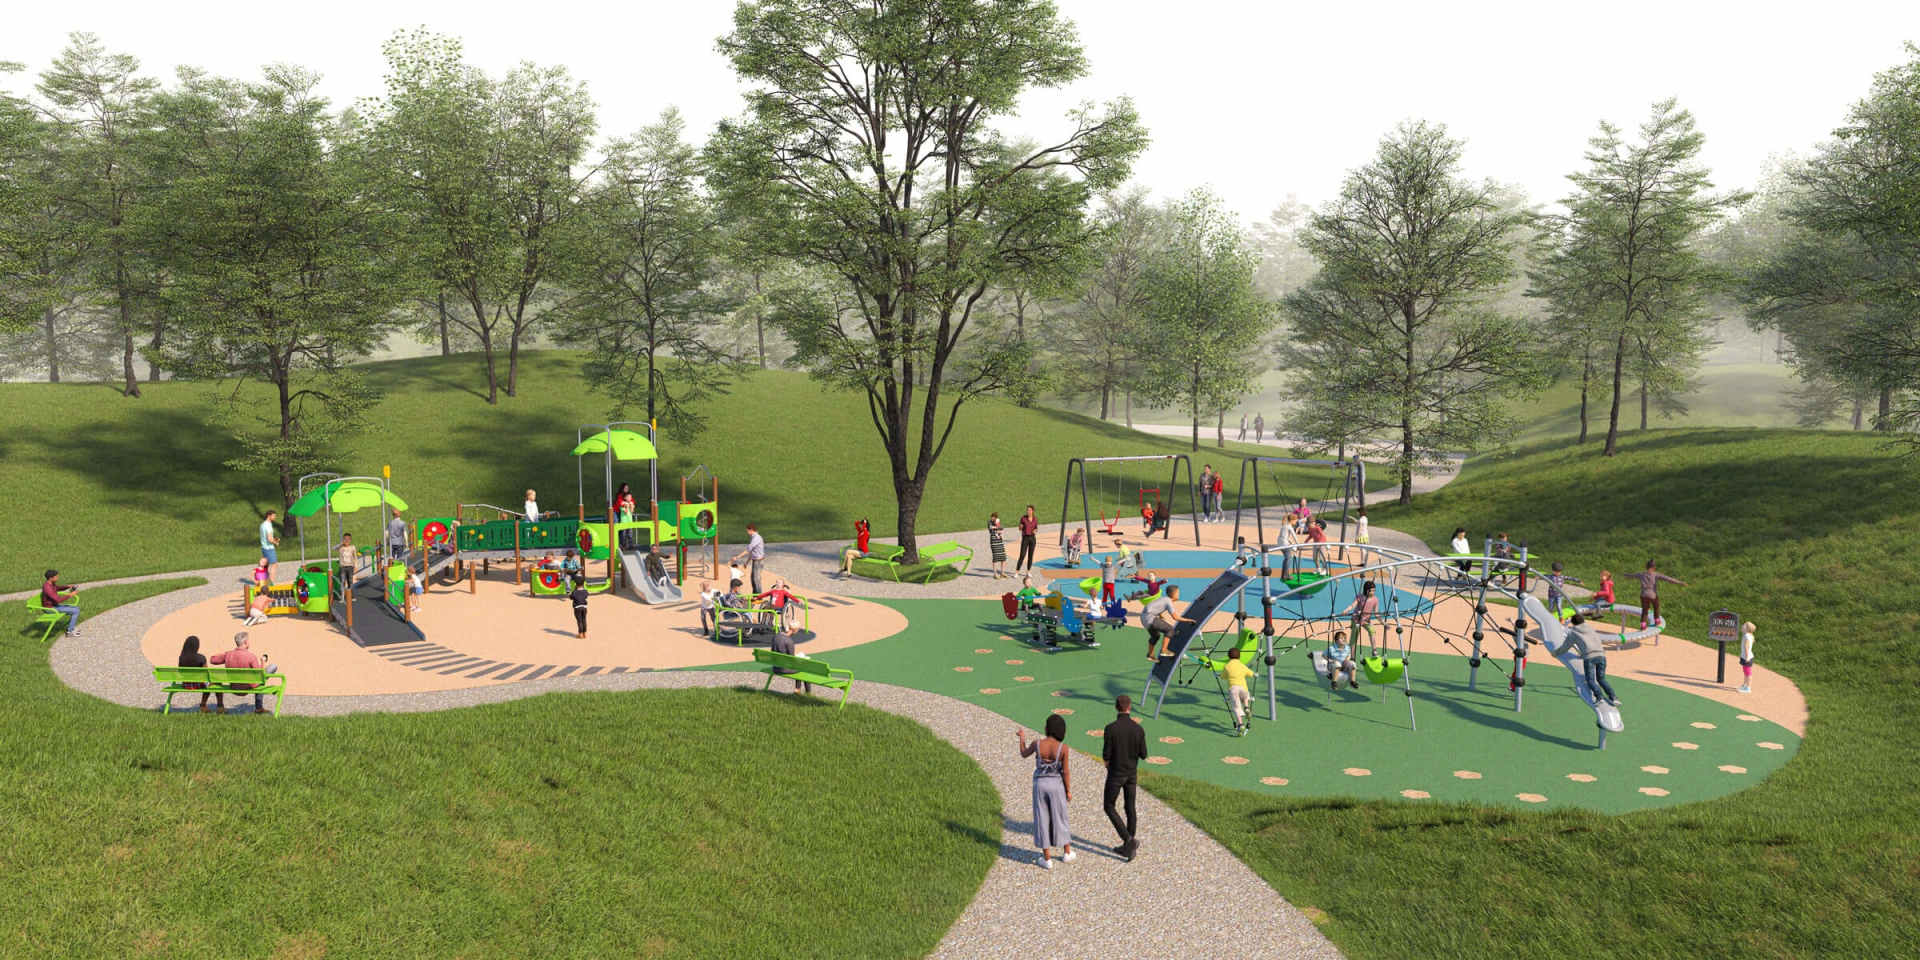 Concept design for inclusive playgrounds